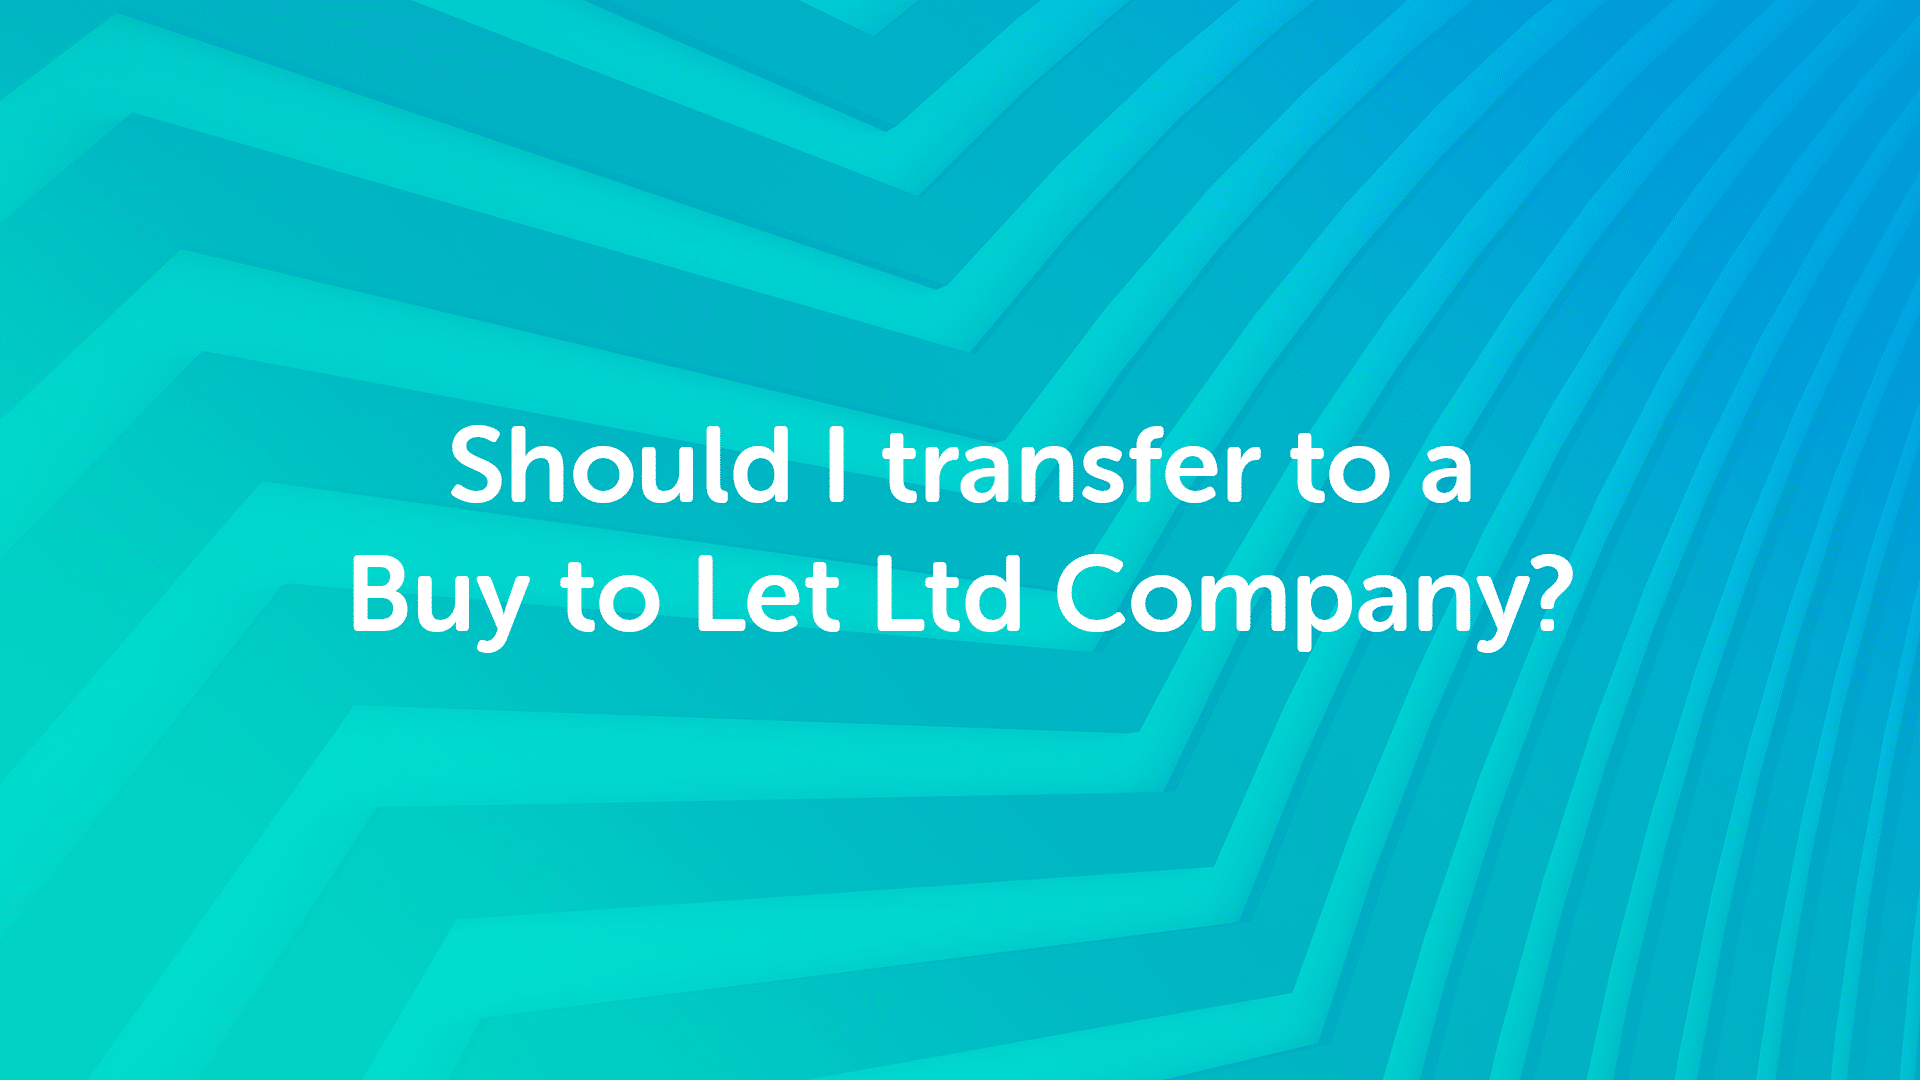 Should I transfer to a Buy to Let Ltd Company?